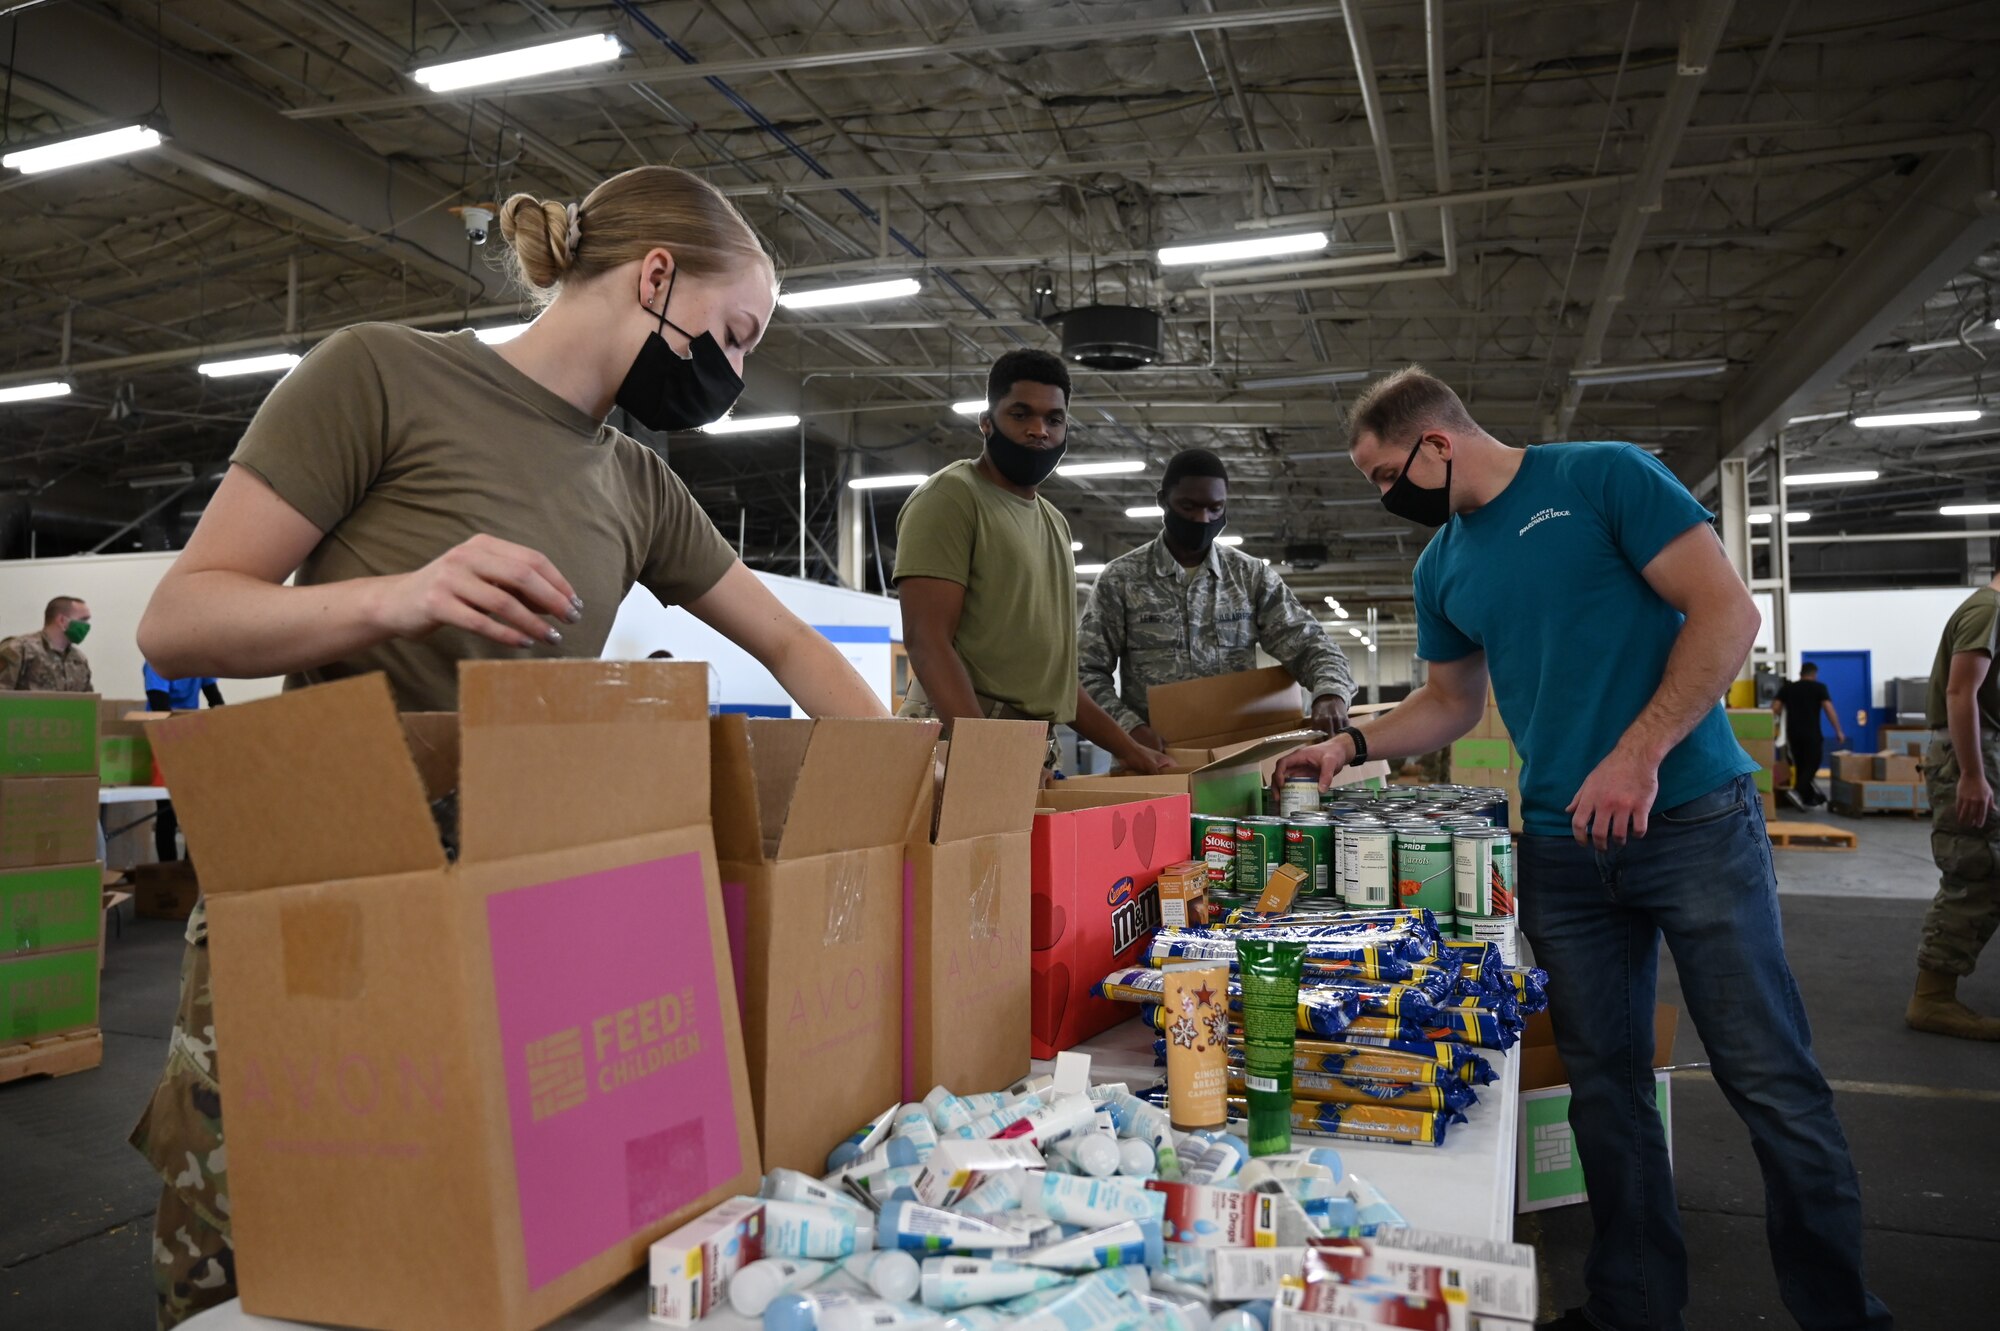 Volunteers along with local community members assemble boxes of food and personal care items.